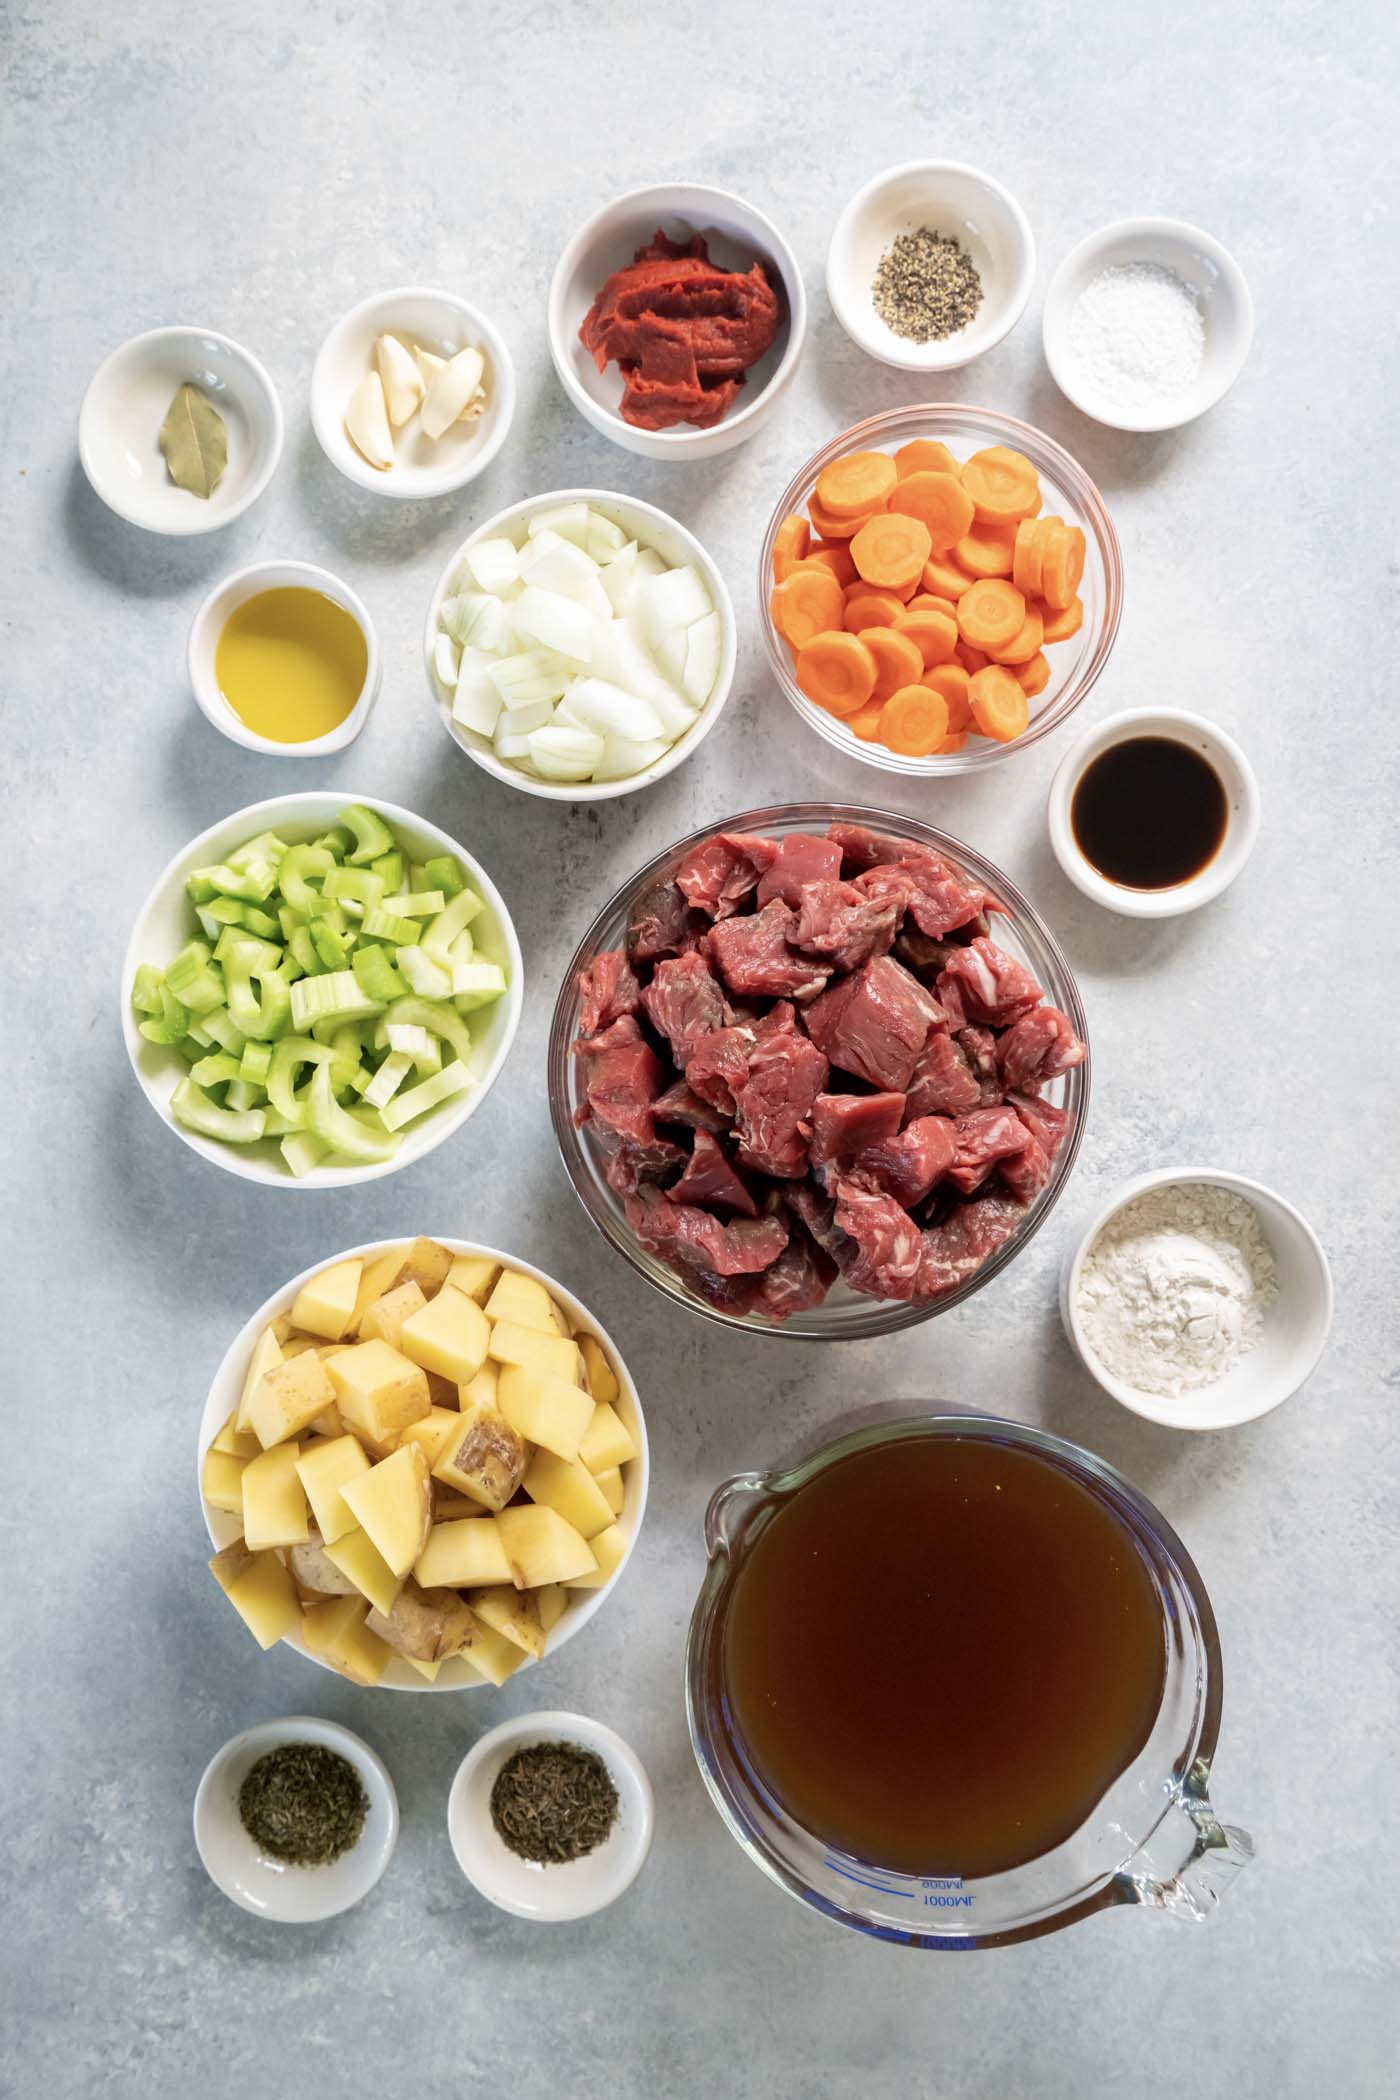 Ingredients for slow cooker beef stew recipe.